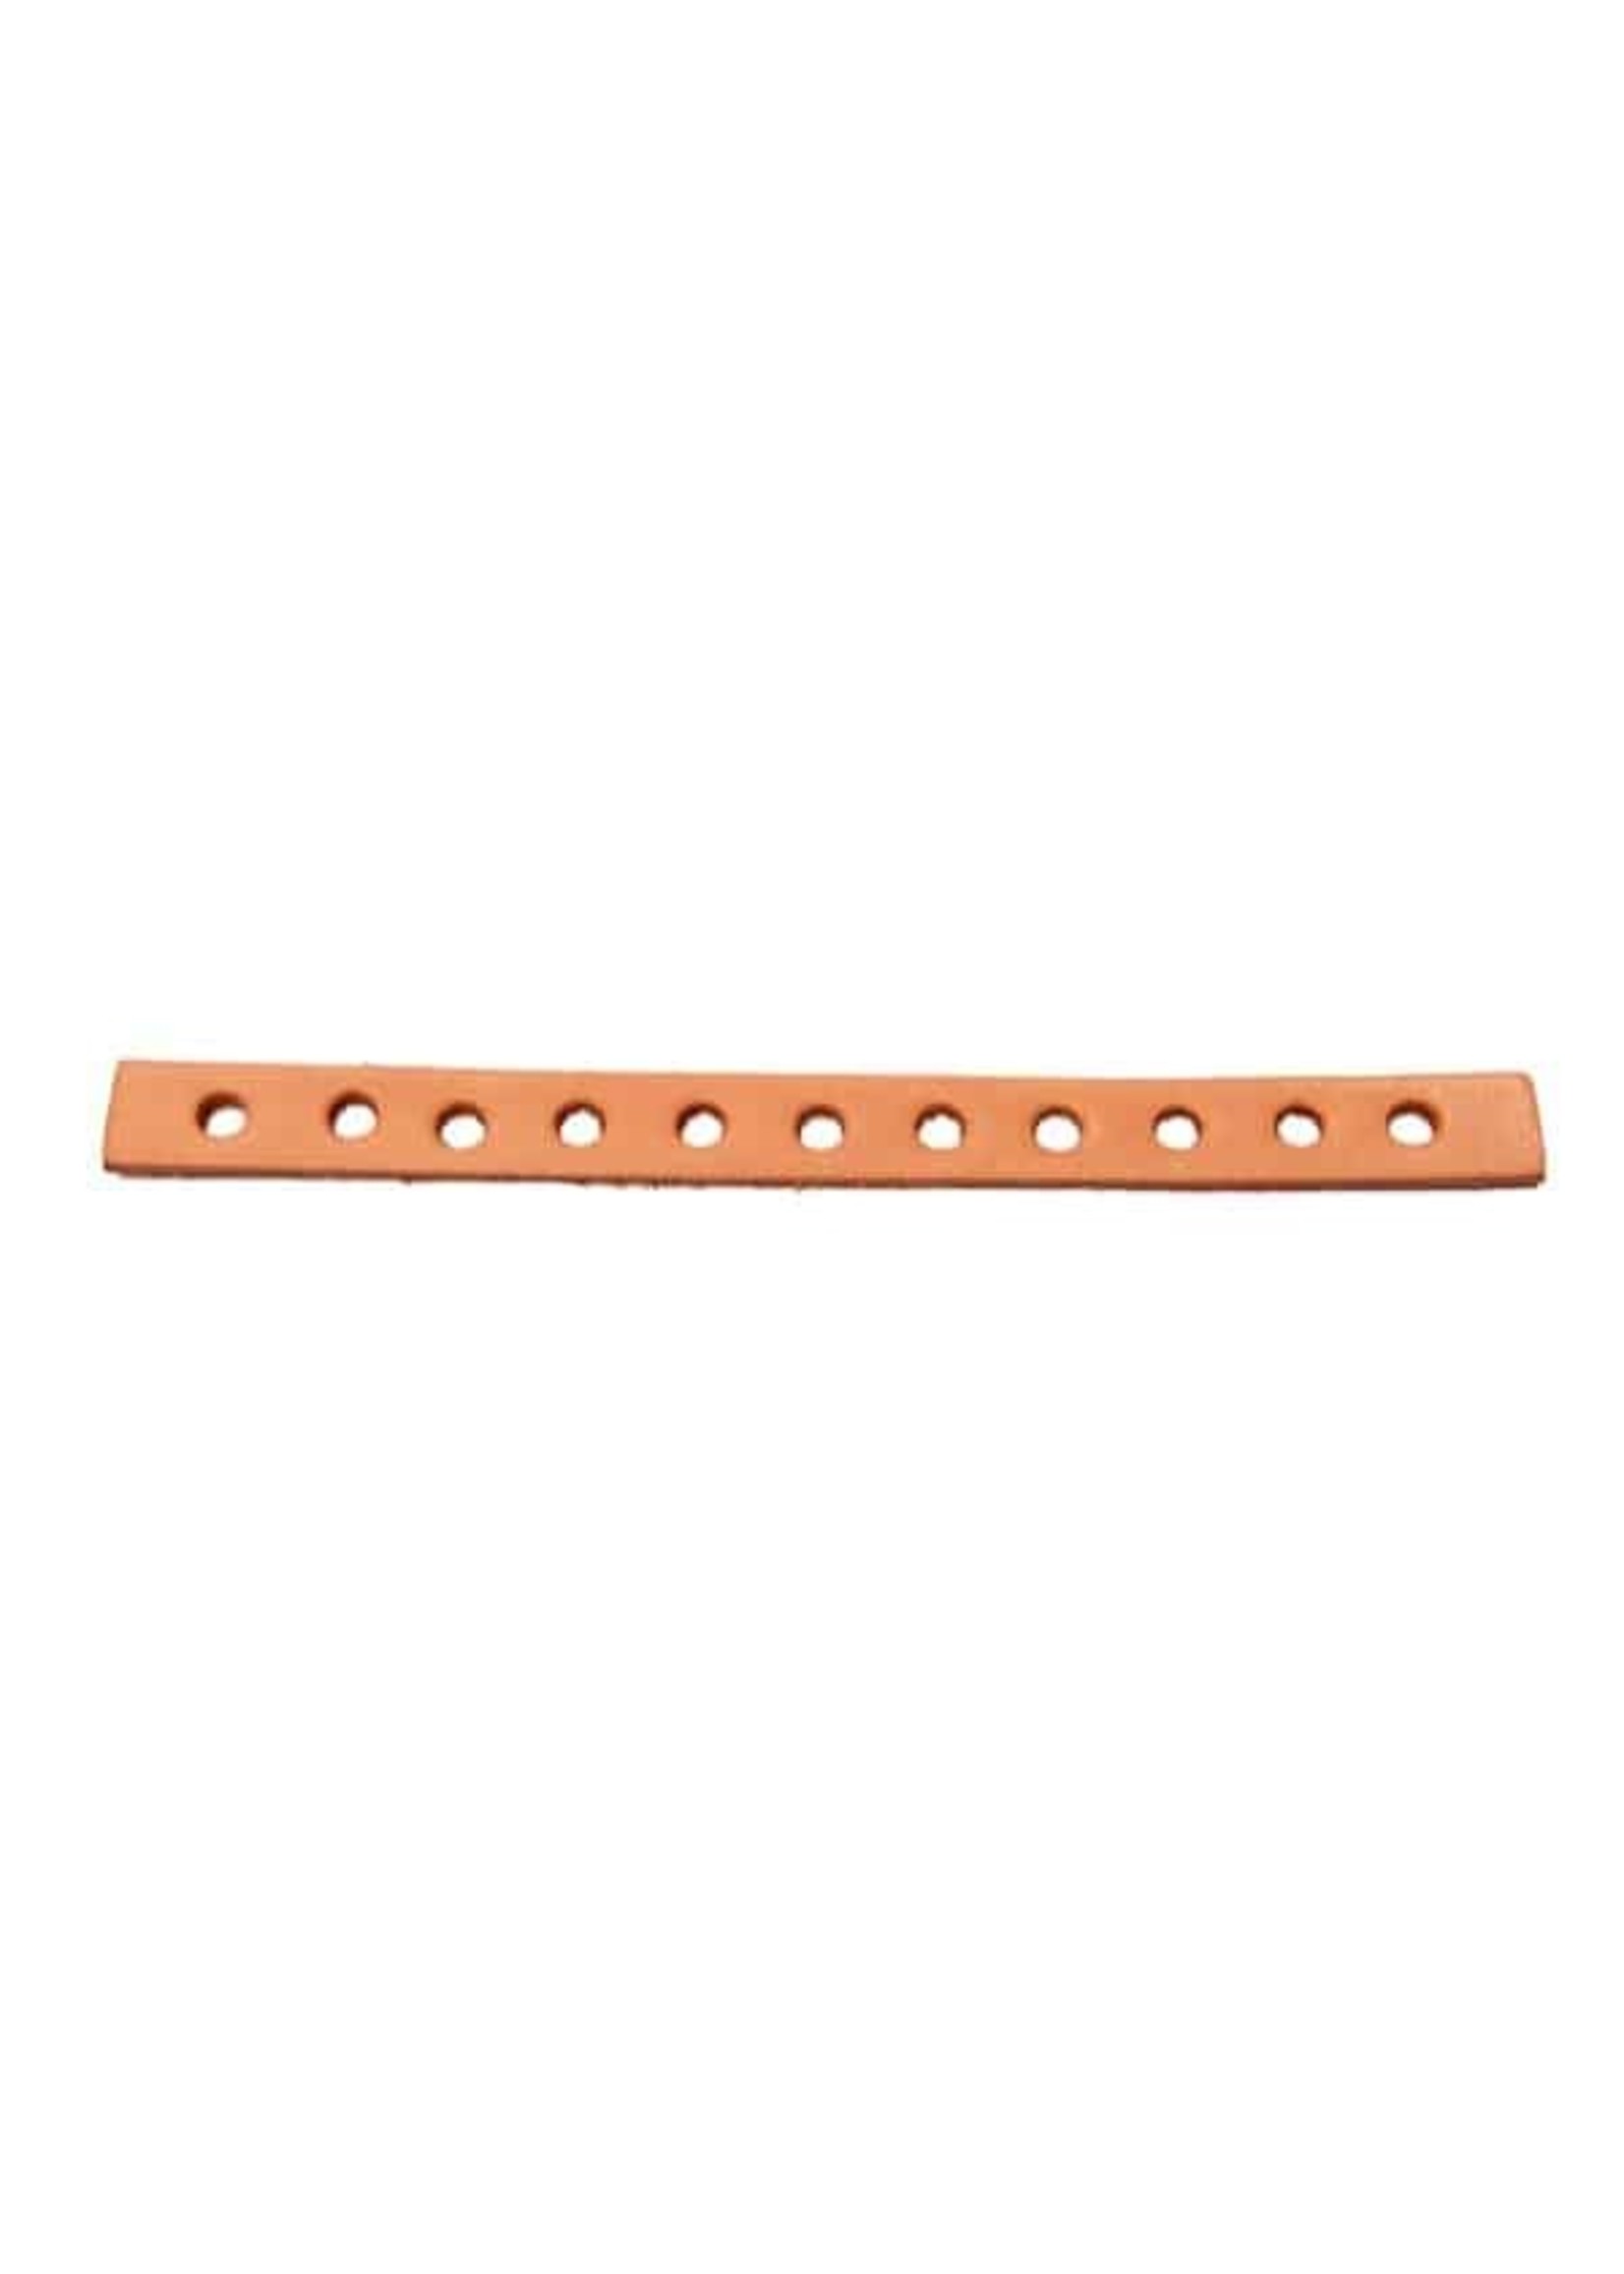 Chirp N Dales Zoo-Max Leather Strip 1/2” x 6” (11 Holes 1/4″)